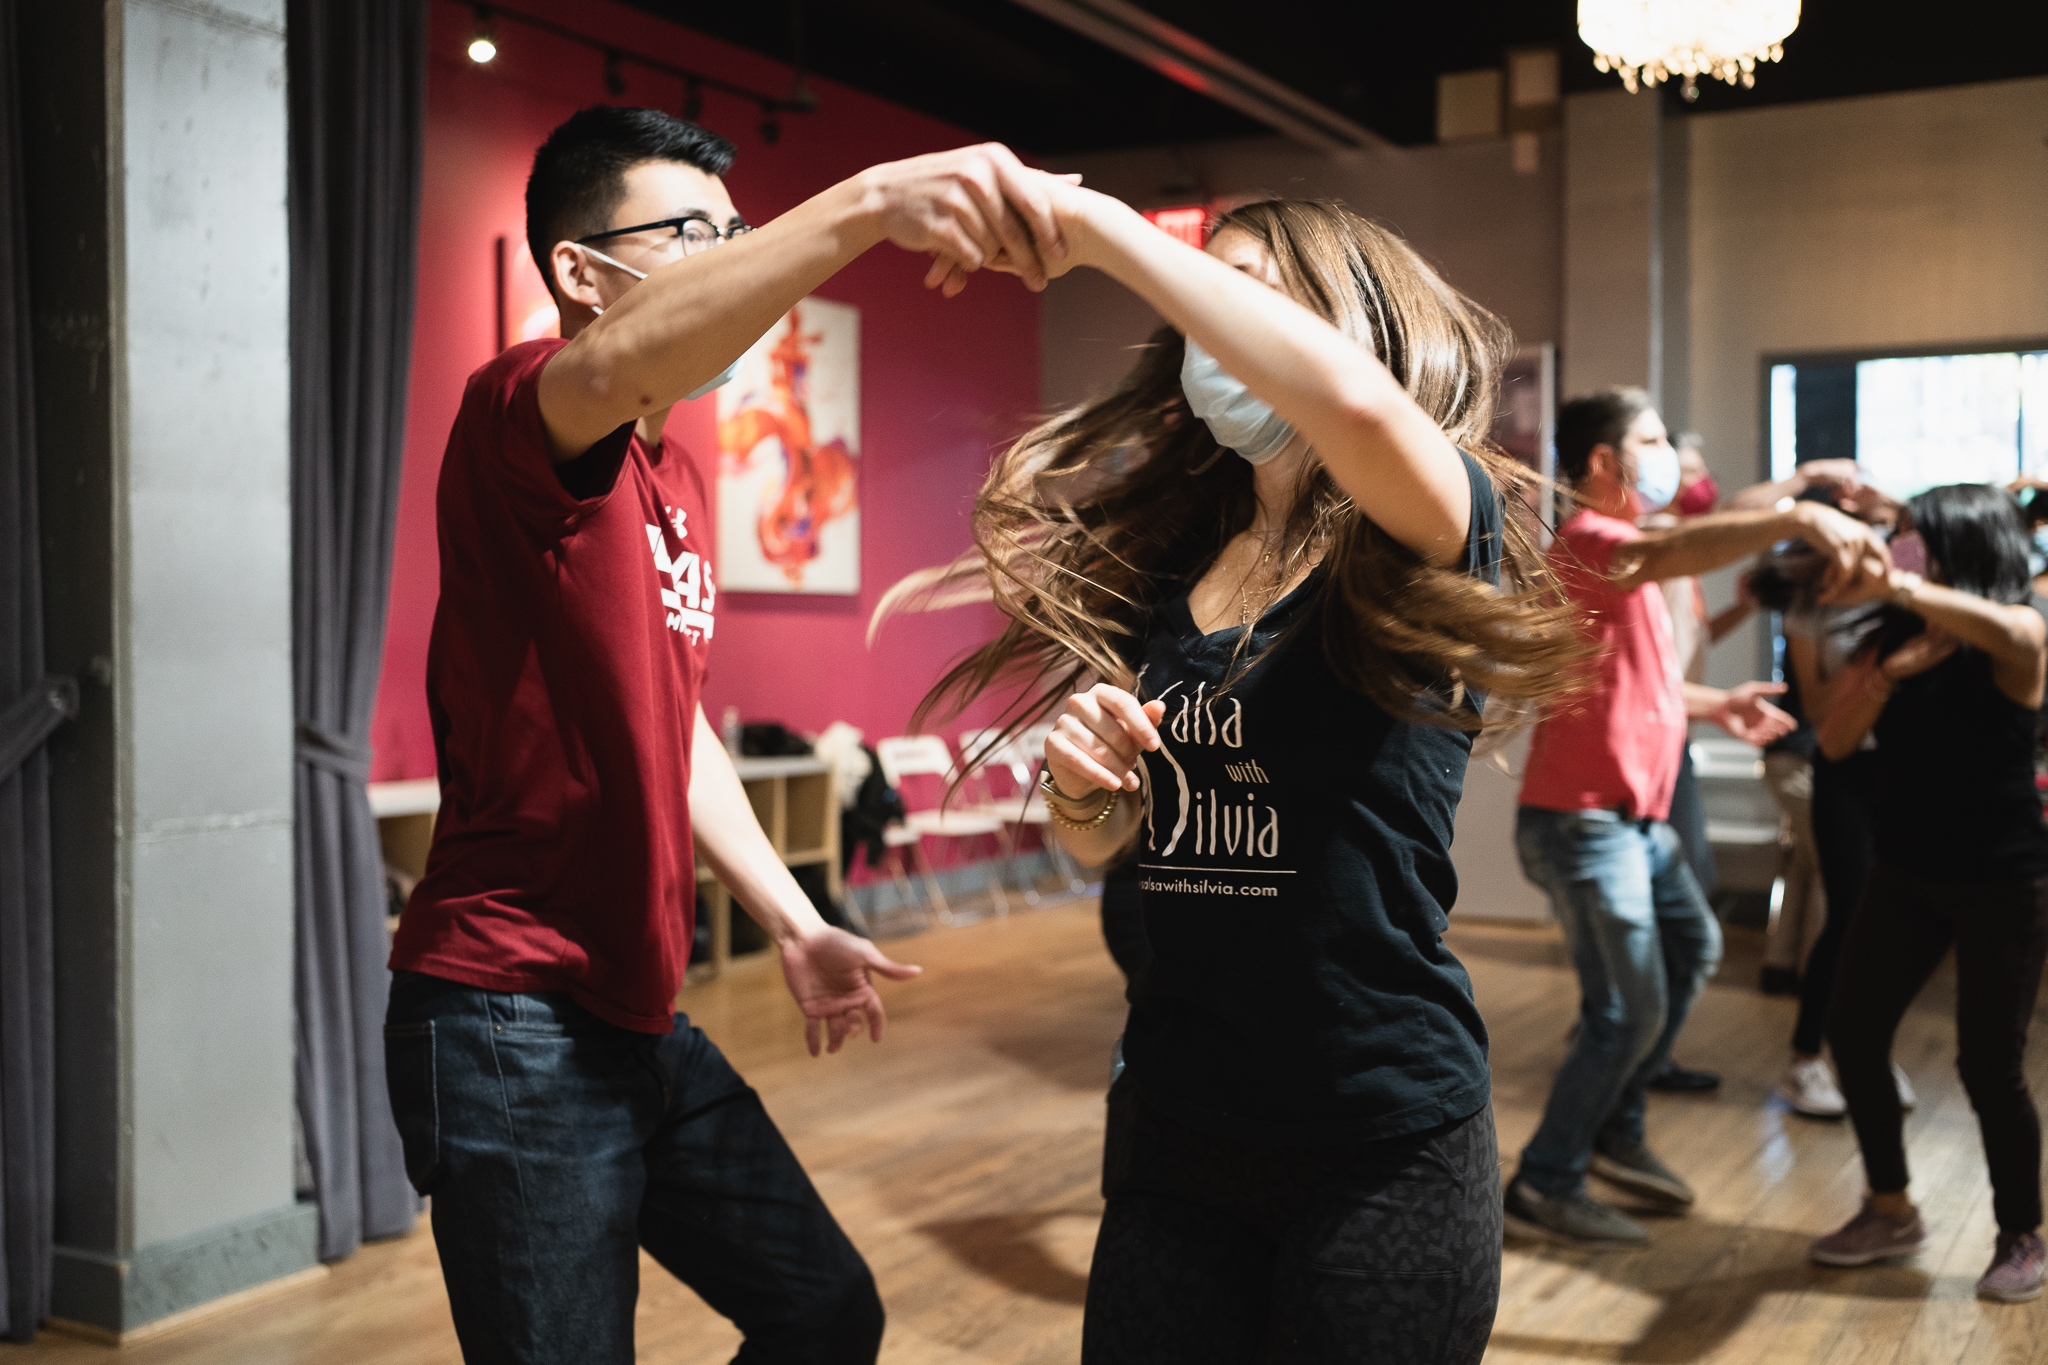 Stephanie Metzger teaches Salsa And Bachata at the Salsa With Silvia studios in DC and Bethesda